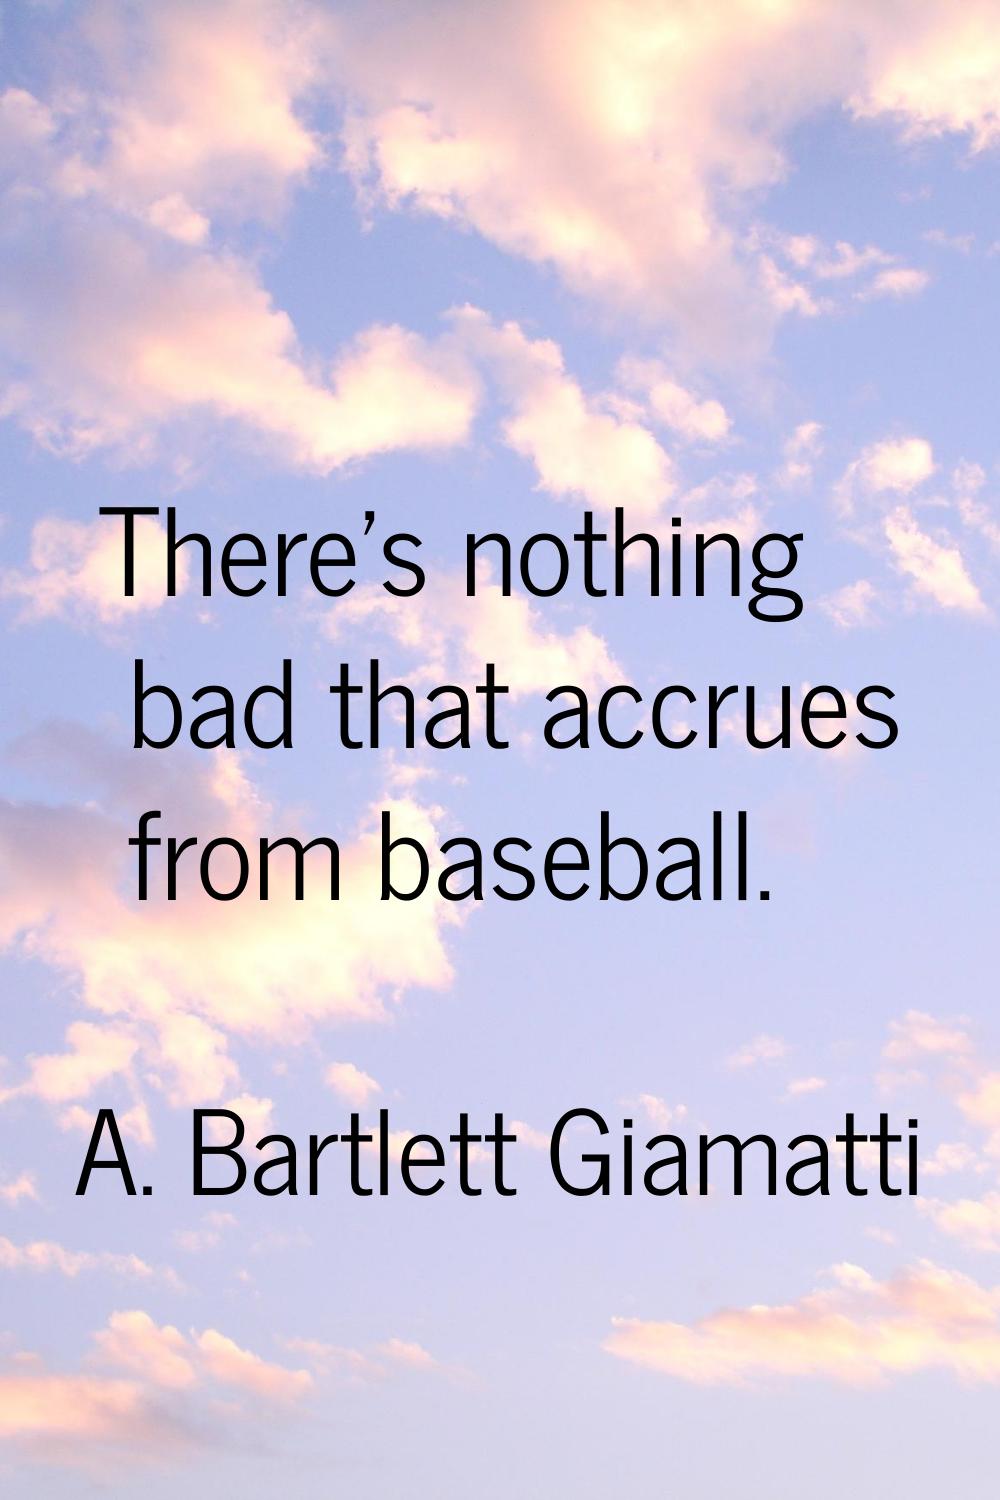 There's nothing bad that accrues from baseball.